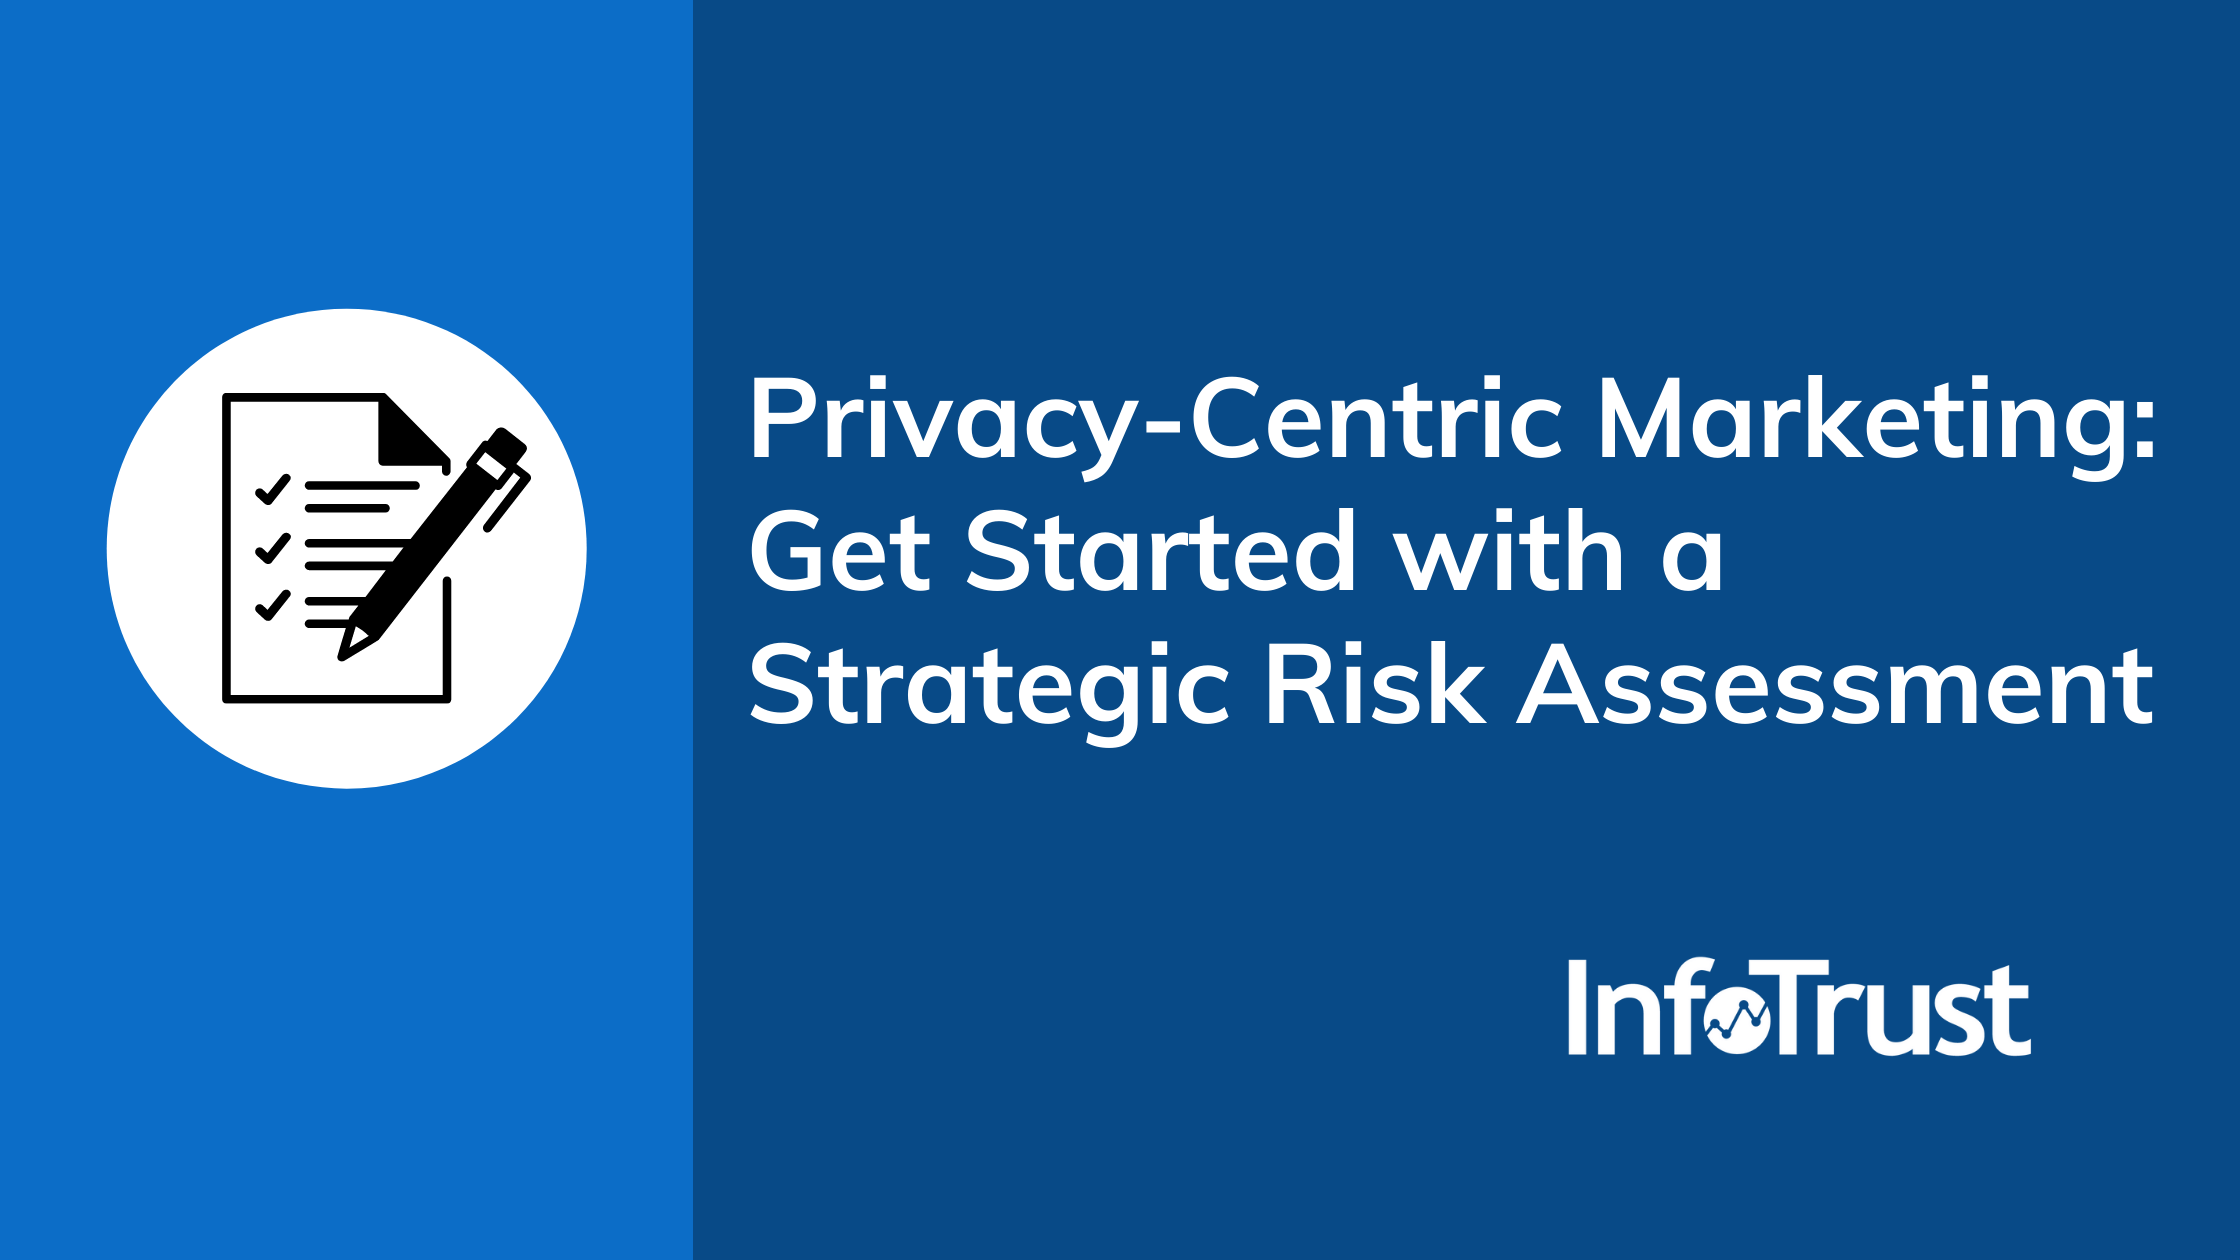 Privacy-Centric Marketing: Getting Started With a Strategic Risk Assessment